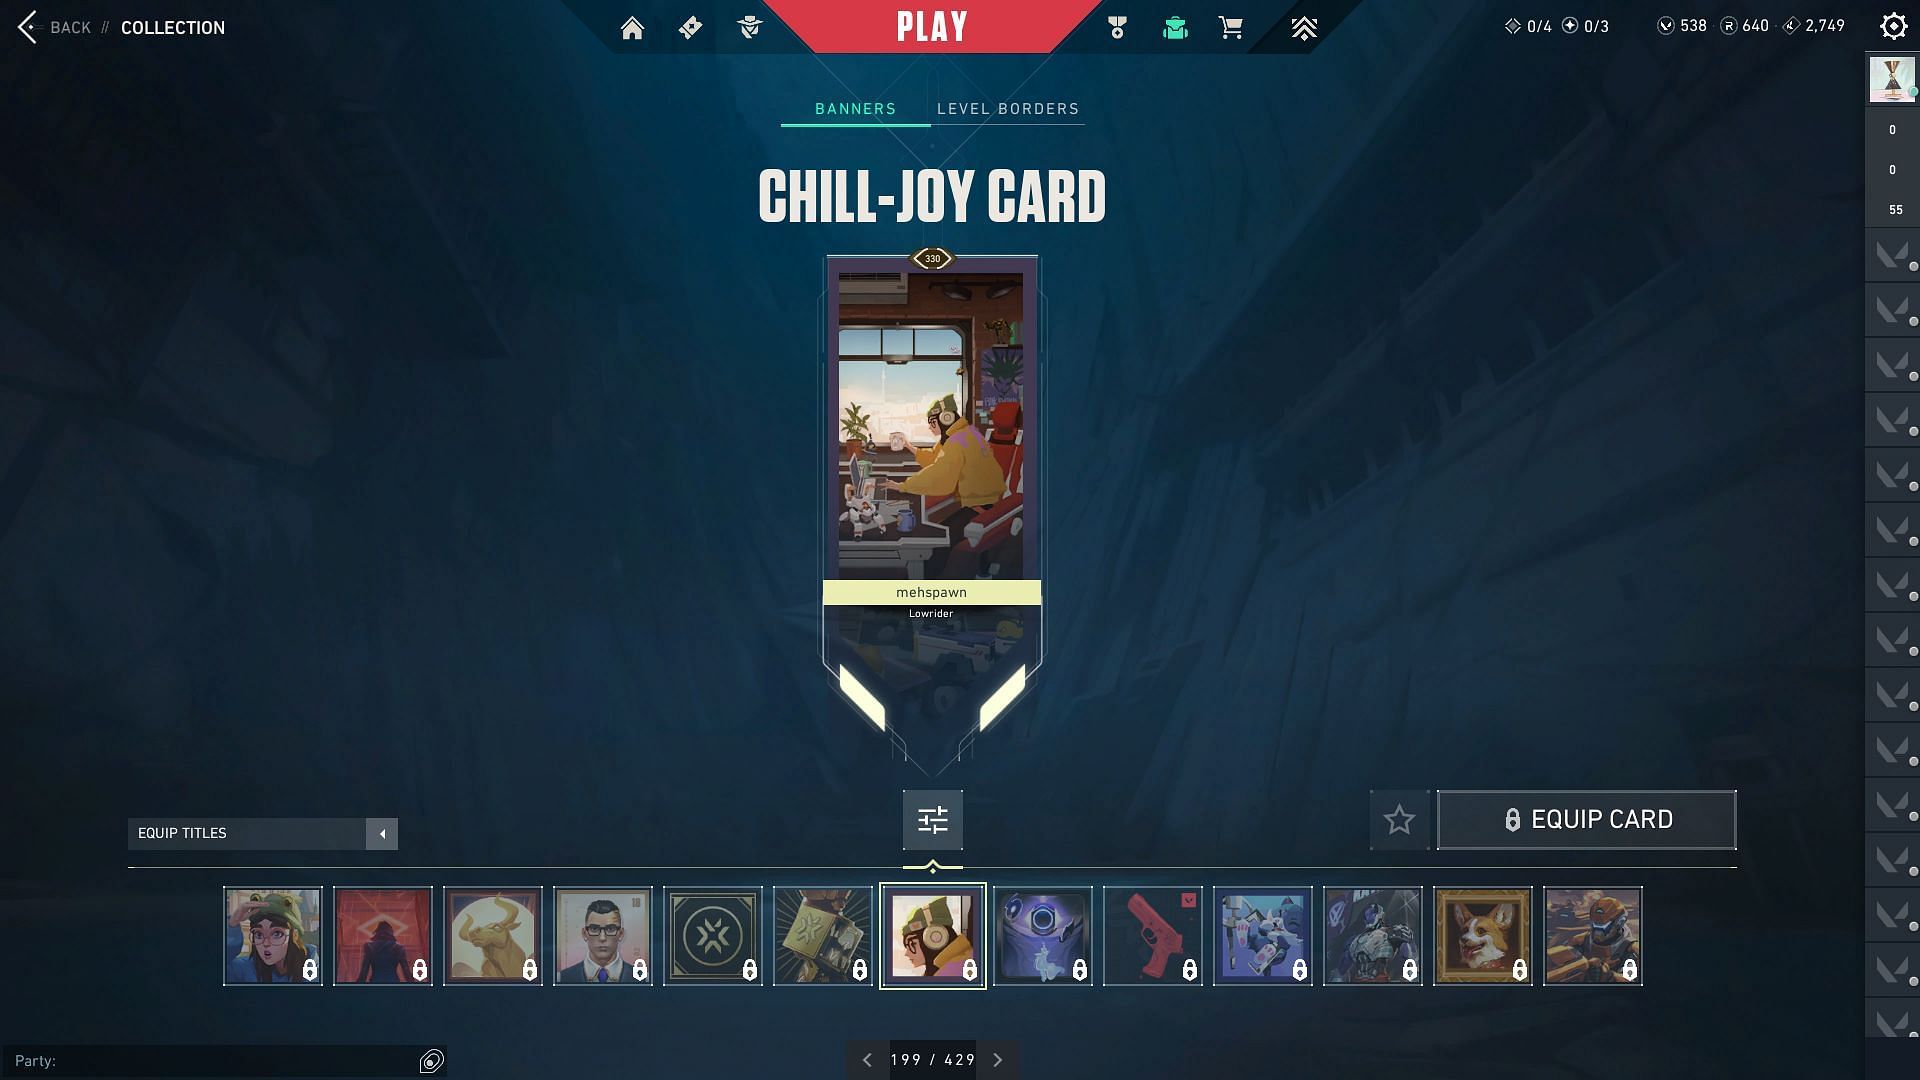 The Chill-joy Player Card (Image via Riot Games)